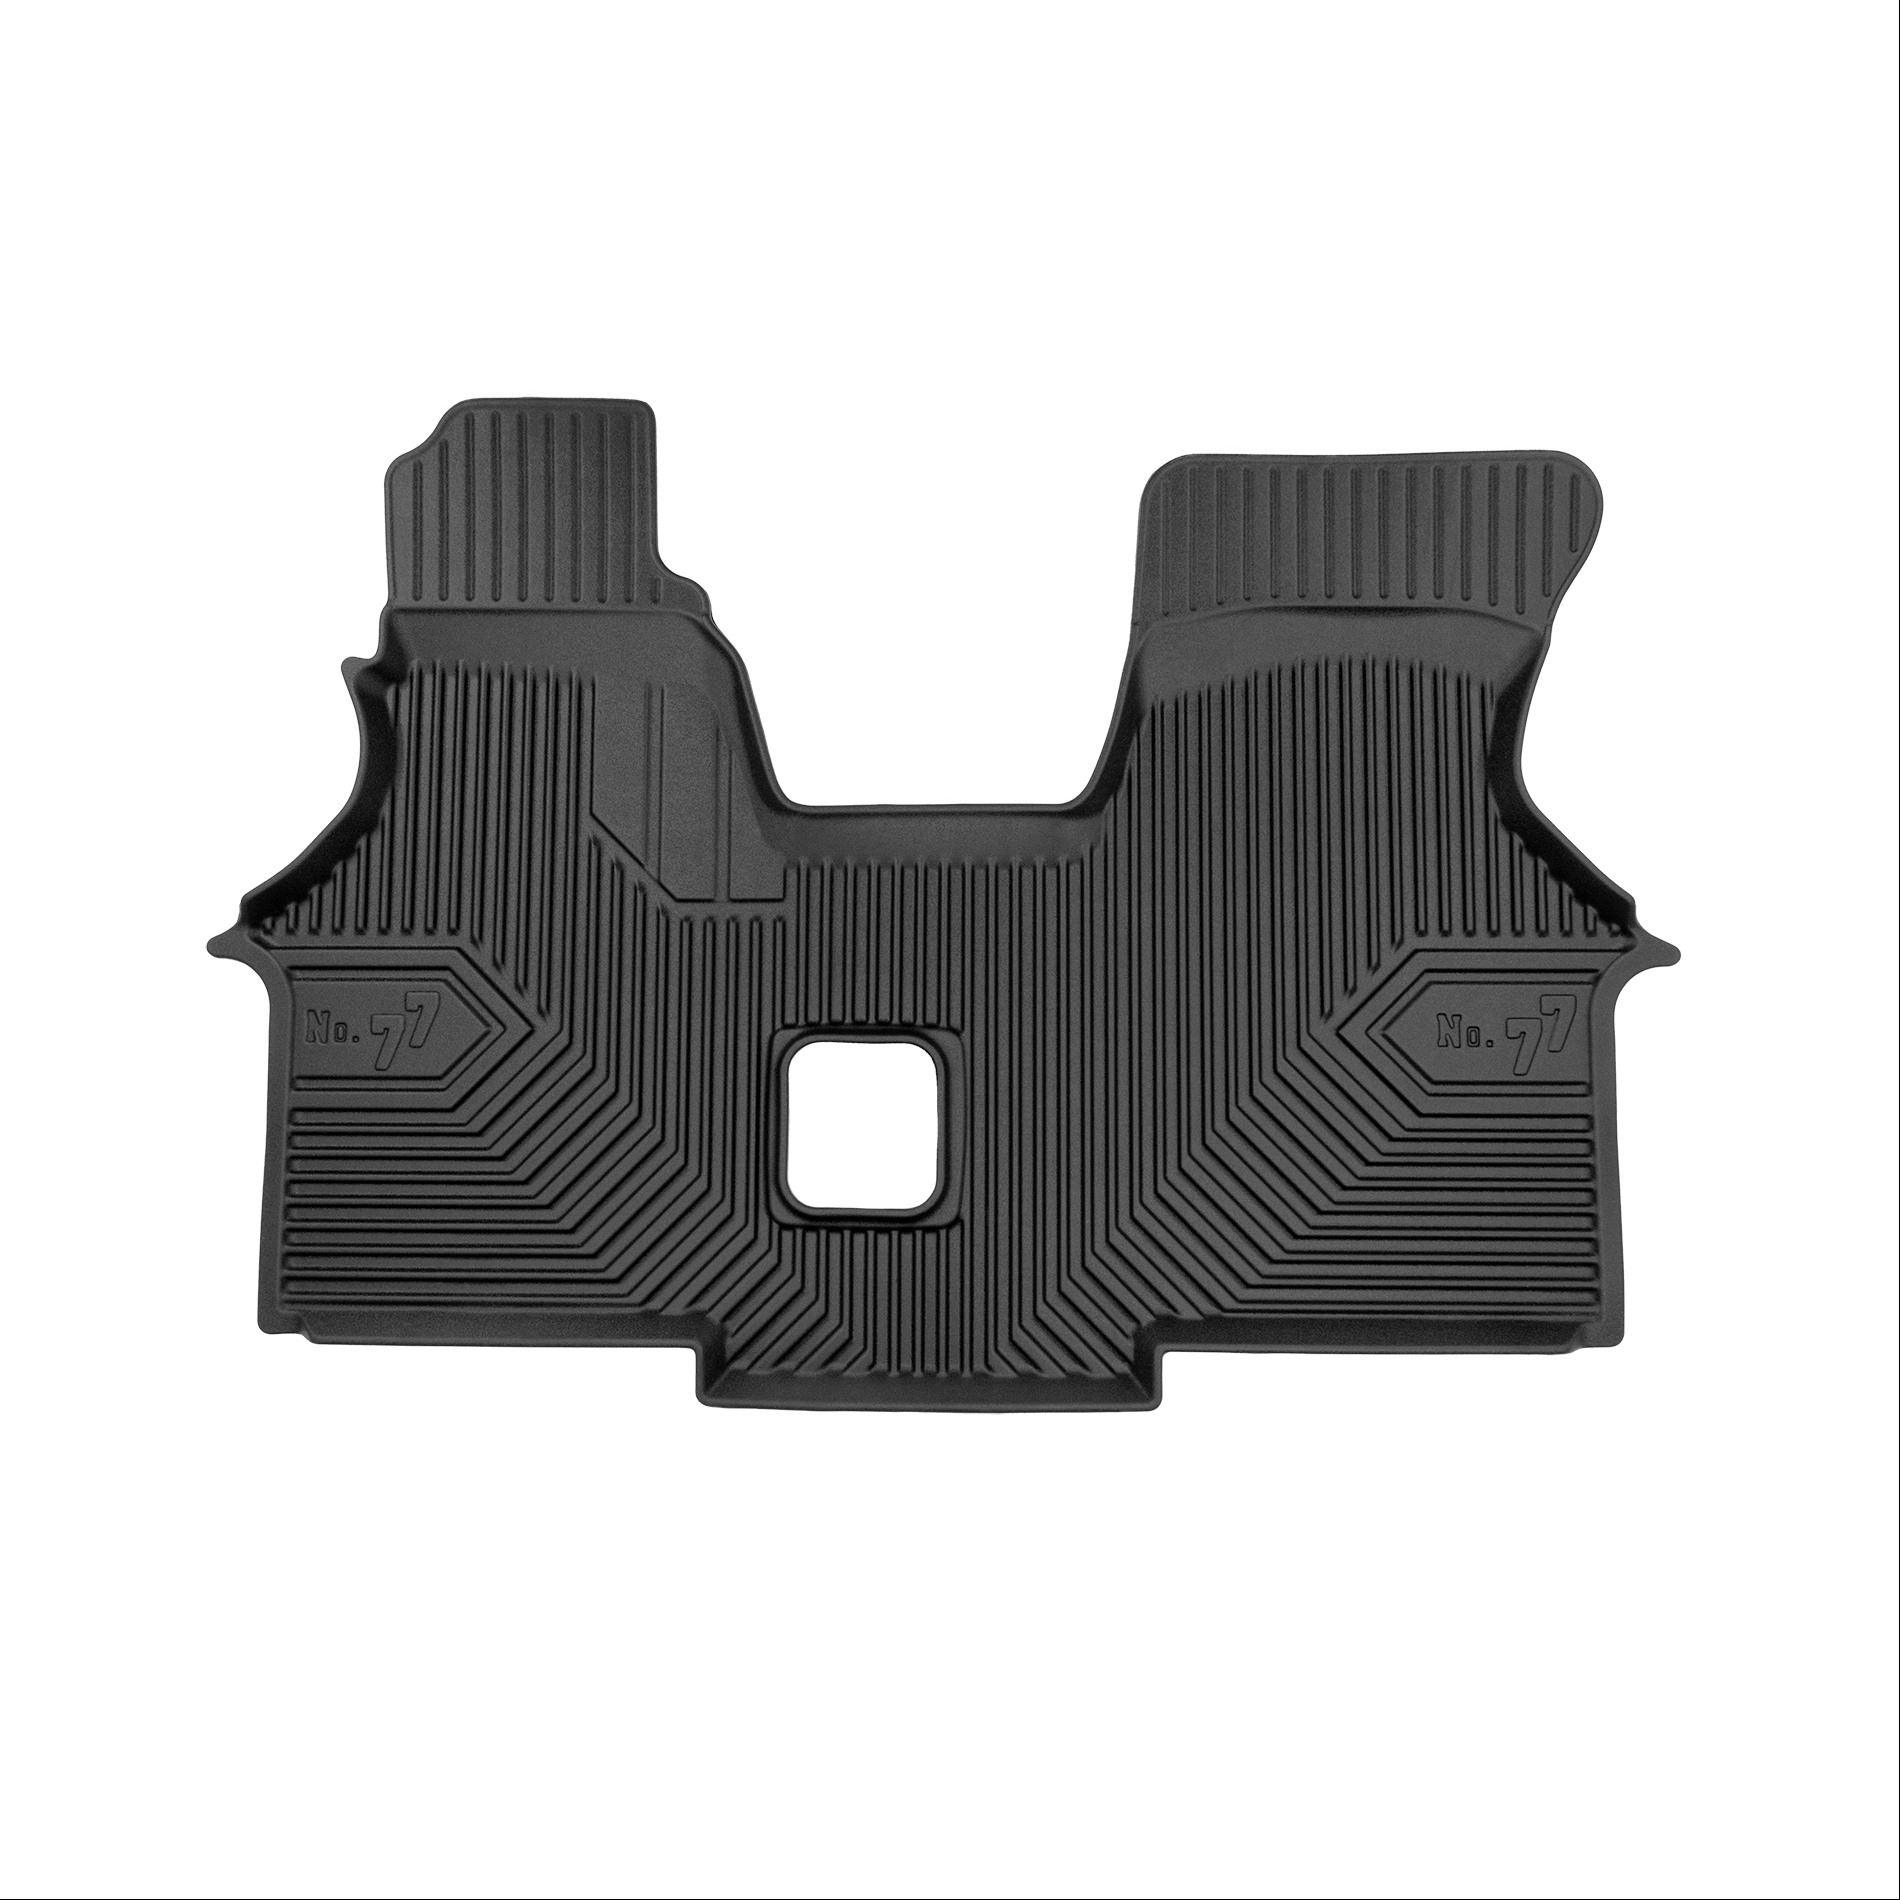 Car mats No77 for VW Transporter T4 1990-2003 1pc Frogum